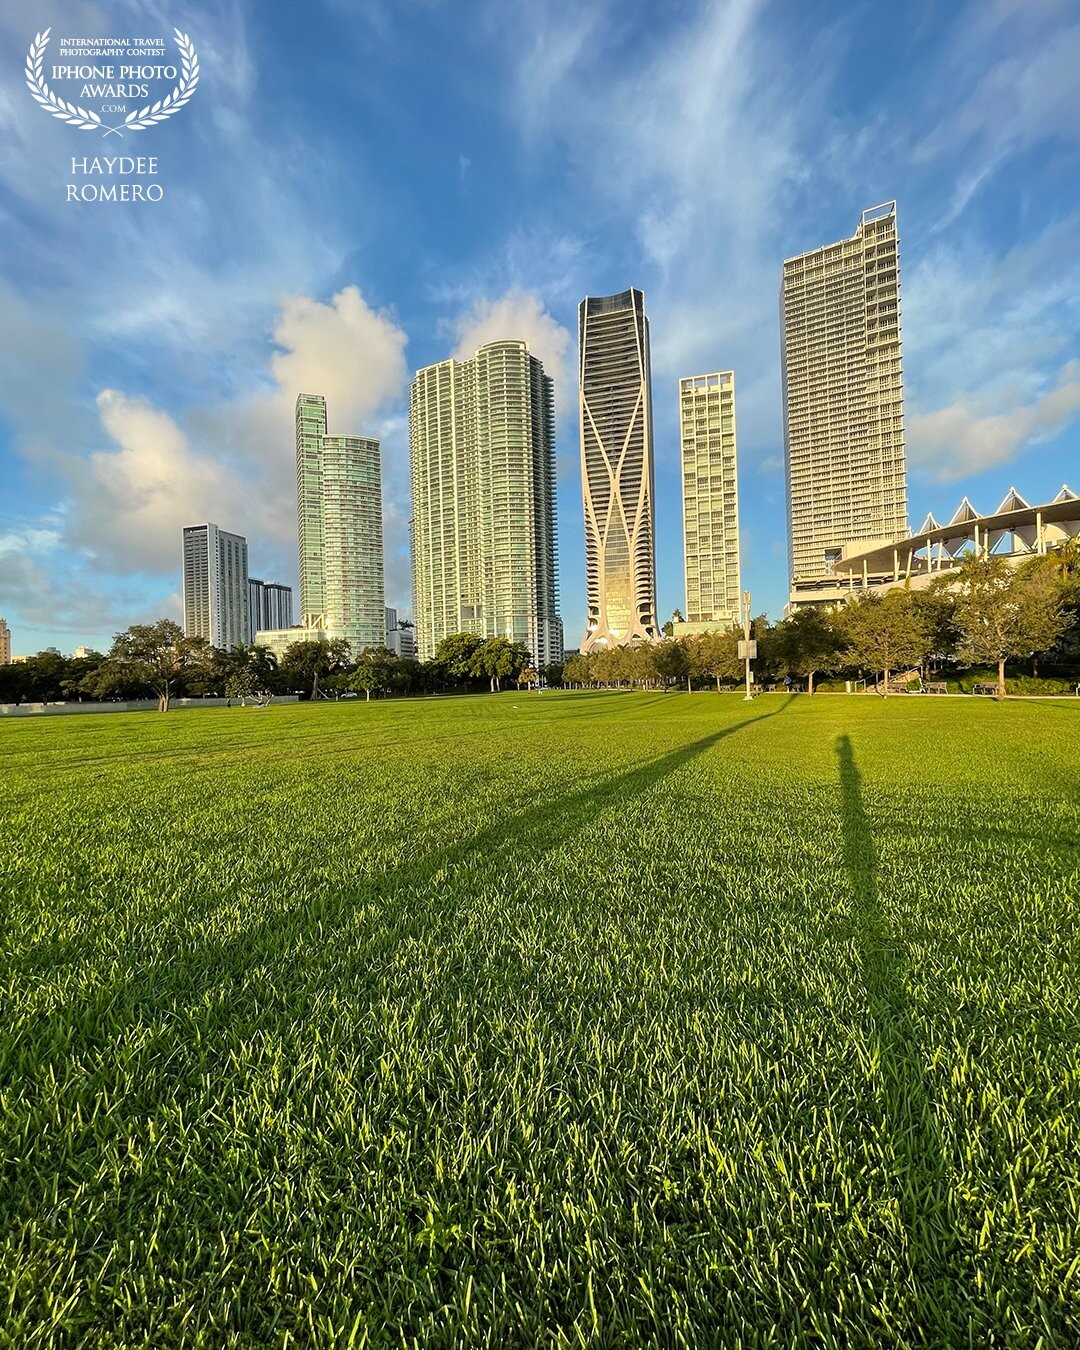 Modern skyscrapers stretch up towards clouds that appear to be racing across the sky behind the Perez Art Museum and the adjacent park in downtown Miami.